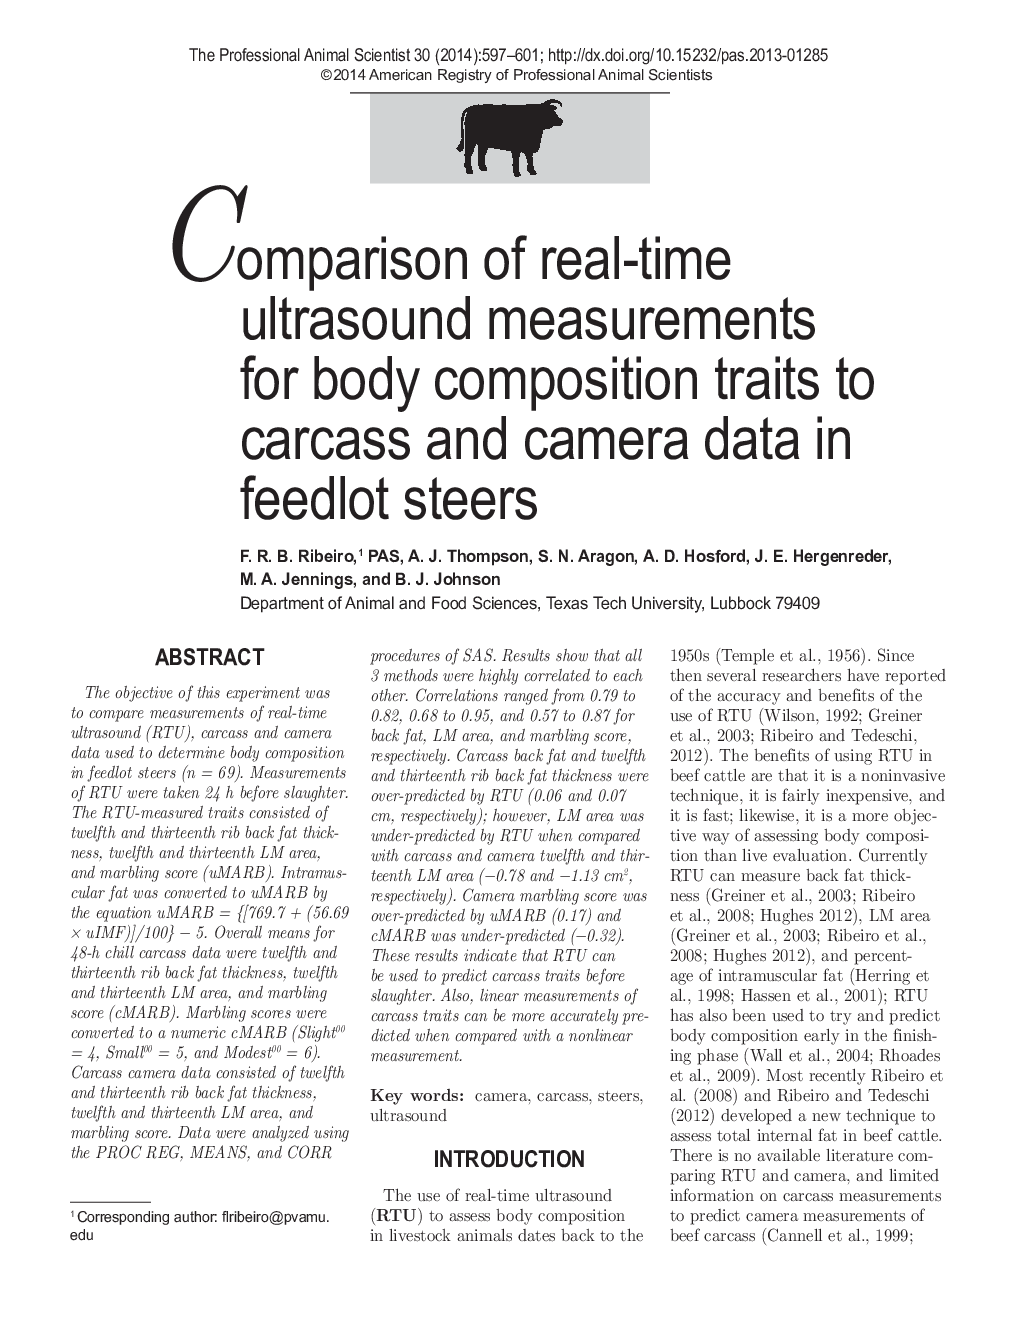 Comparison of real-time ultrasound measurements for body composition traits to carcass and camera data in feedlot steers